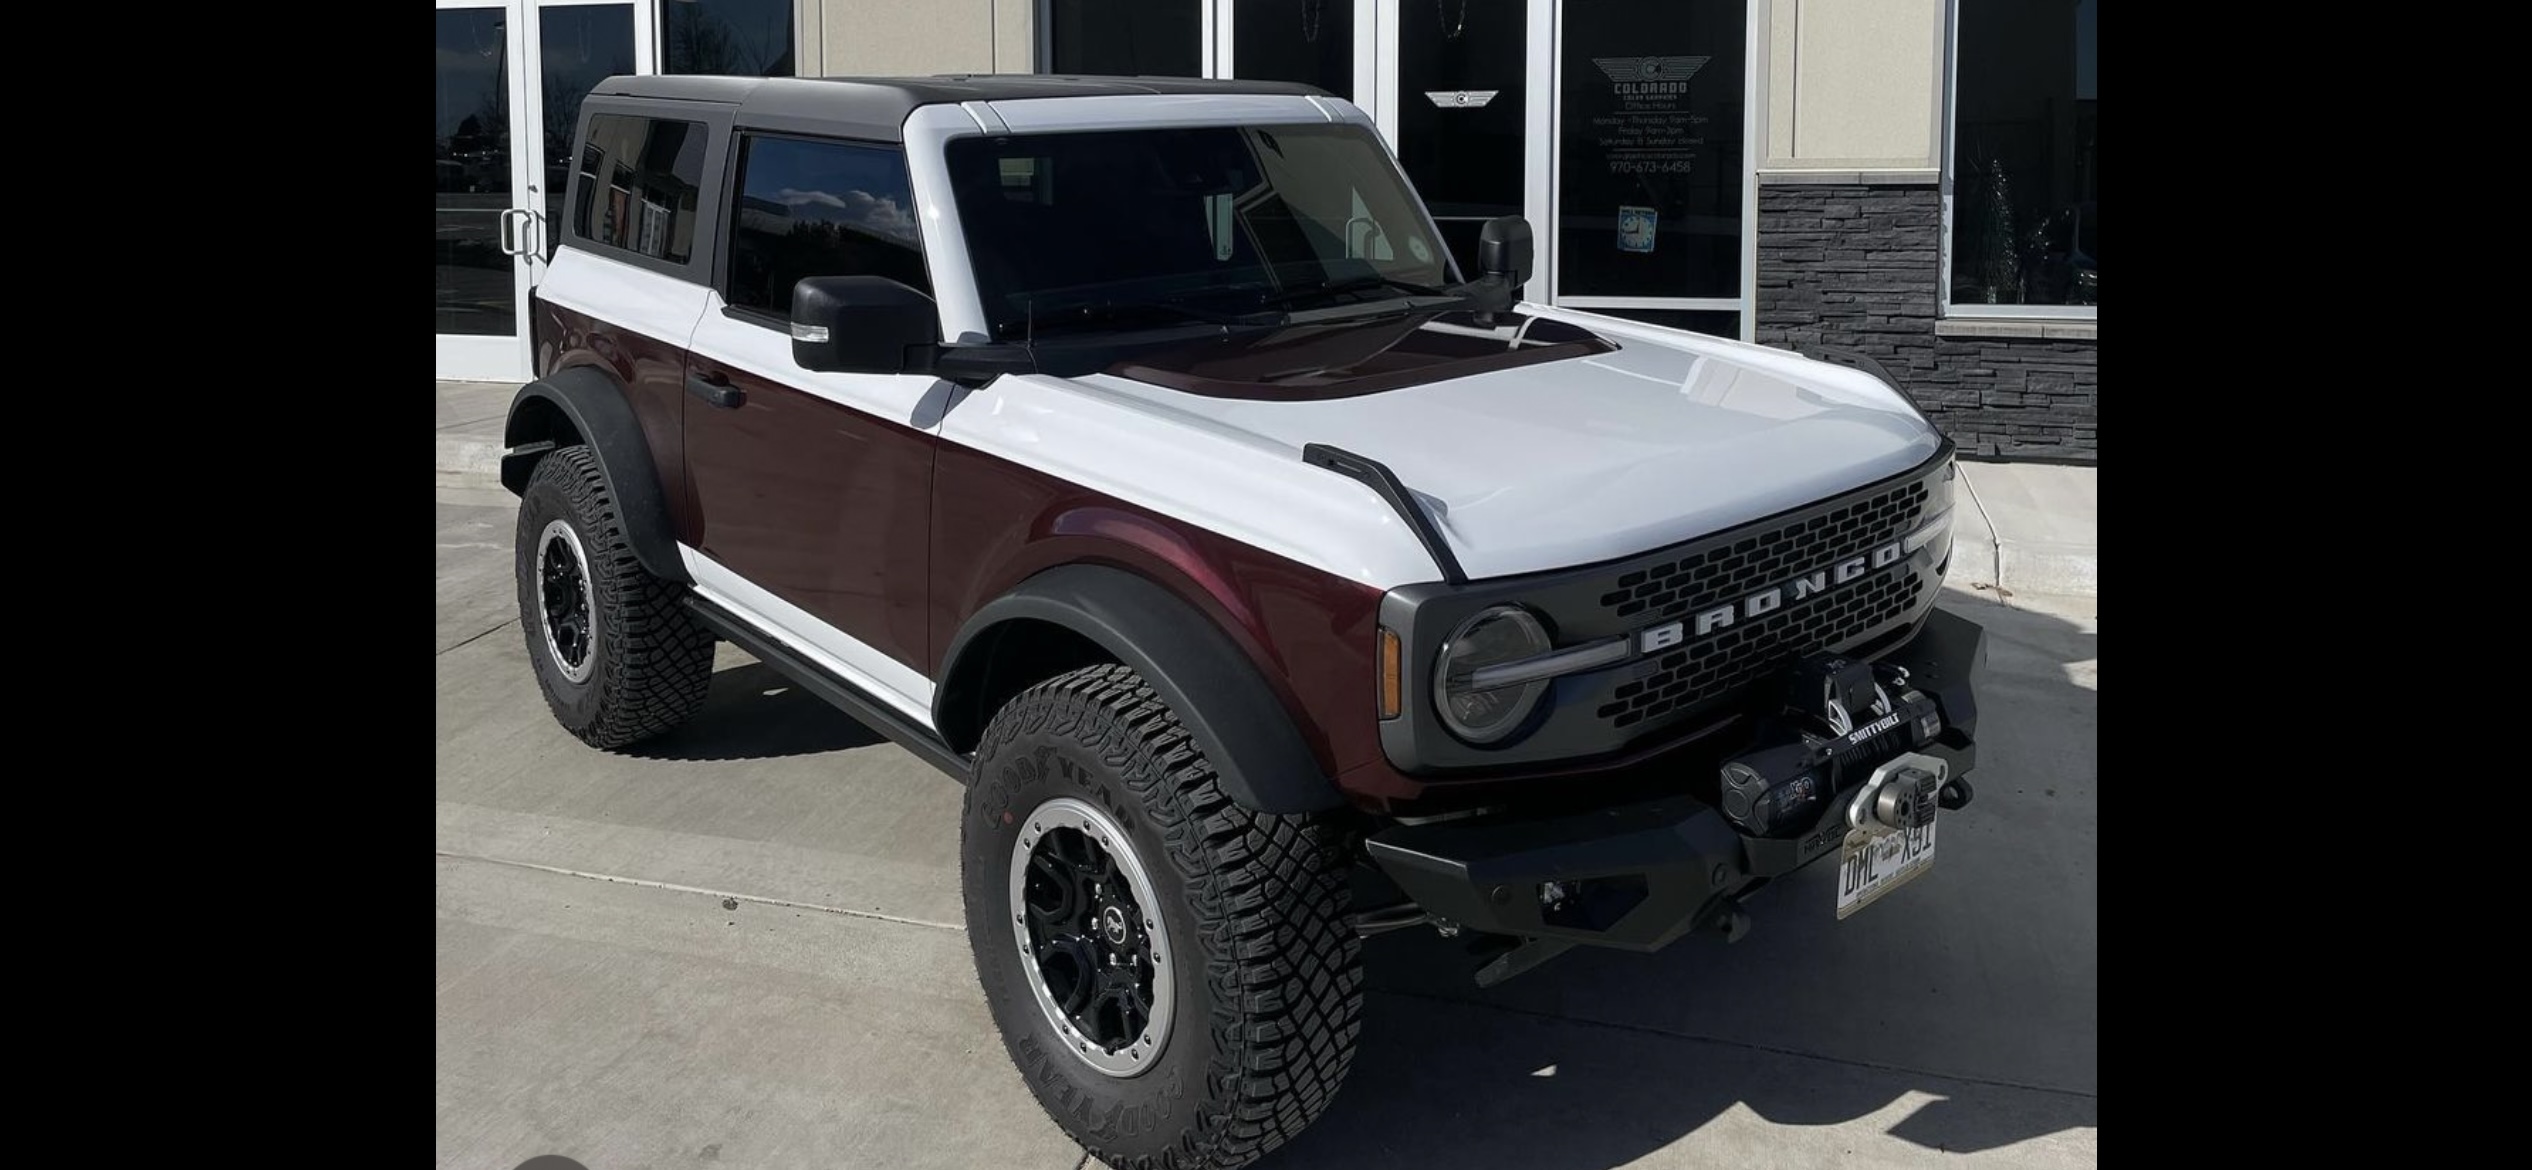 Ford Bronco OXFORD WHITE THREAD!!!! if you’re choosing Oxford White lemme know. I think it’s the best color available at the moment. Bronco 501